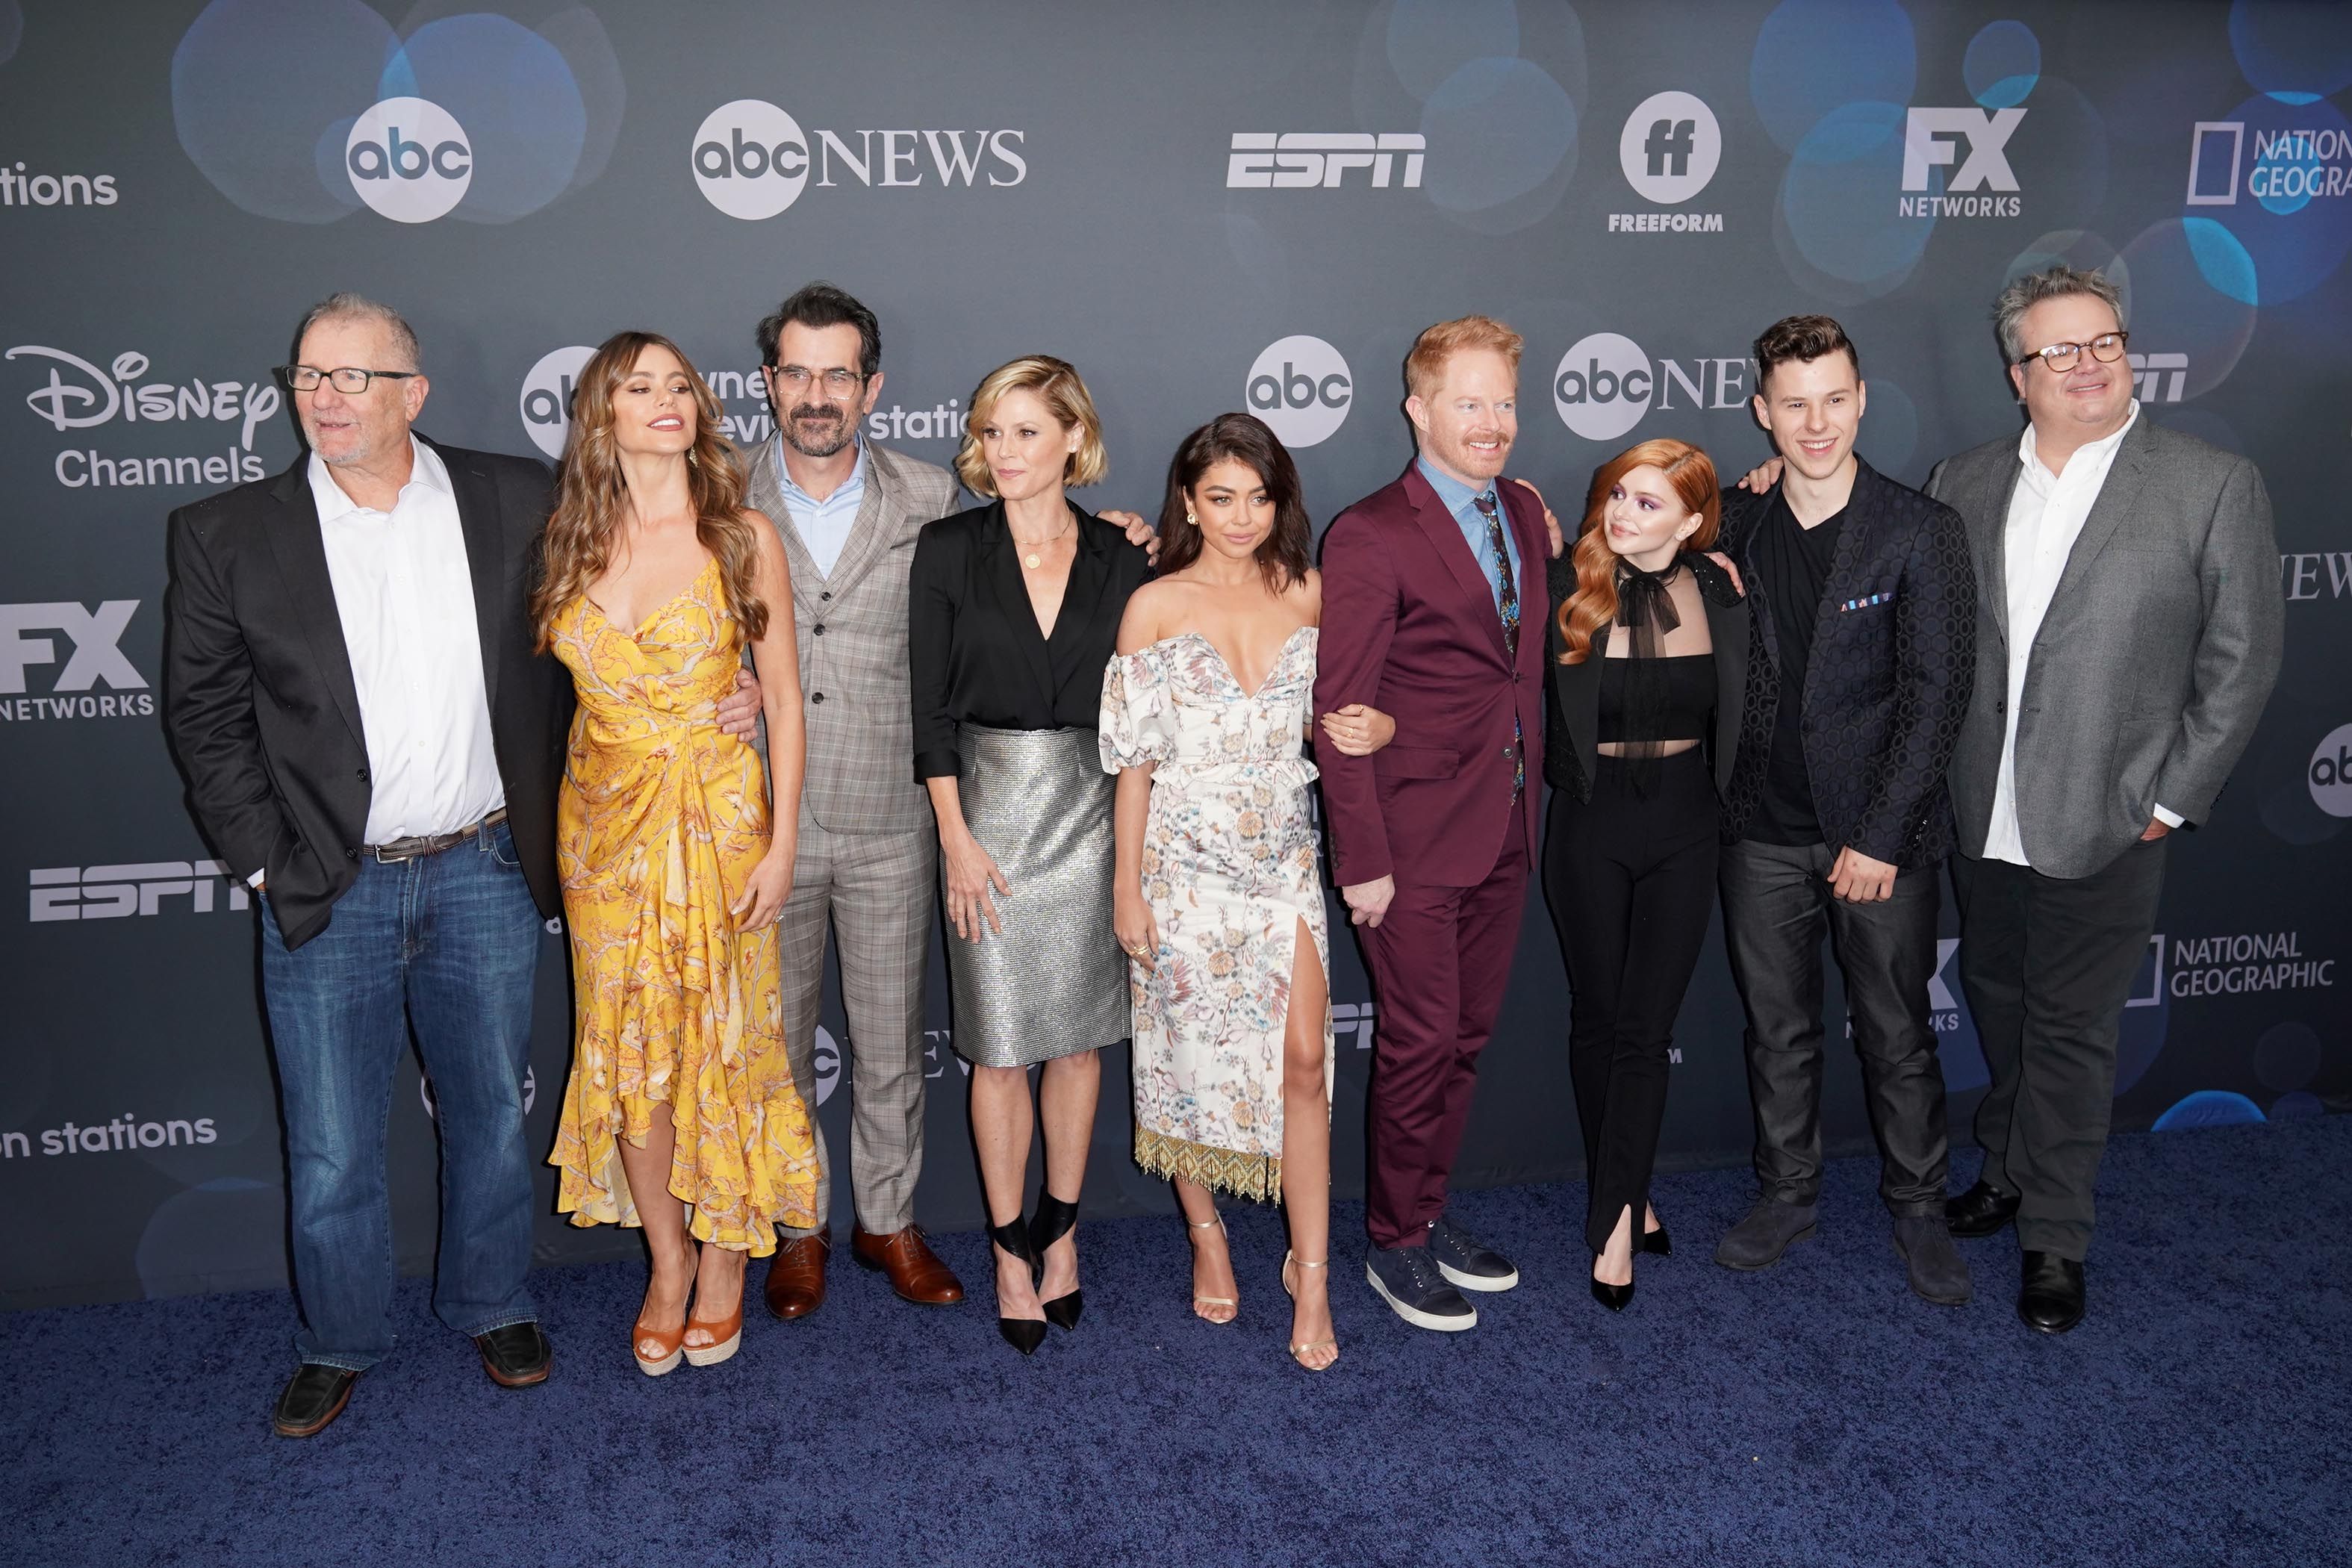 The Modern Family cast taking a photo together at a blue carpet event 